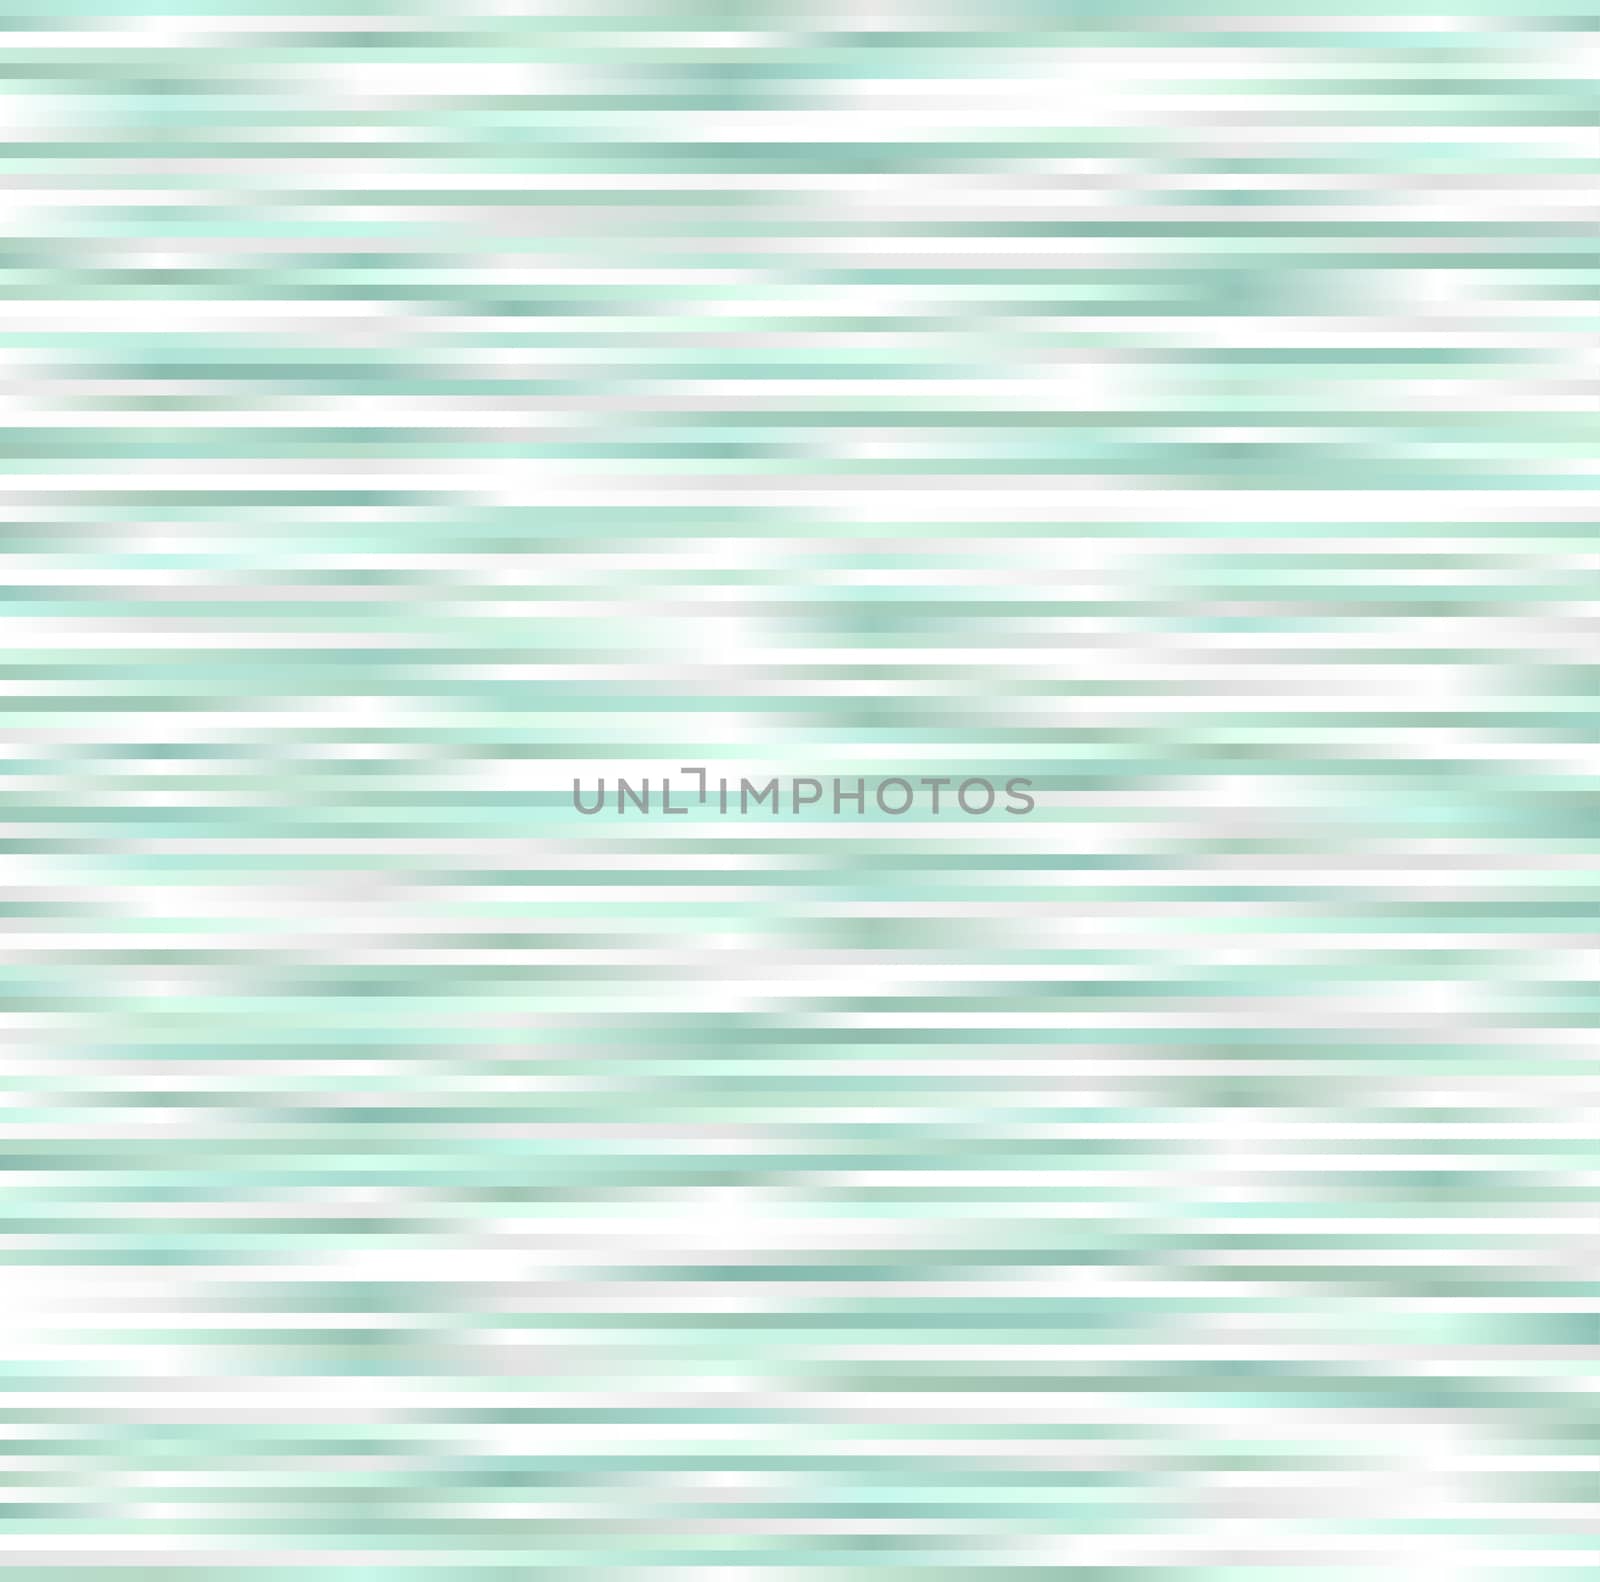 square horizontal stripes green and white gradient background by CherJu